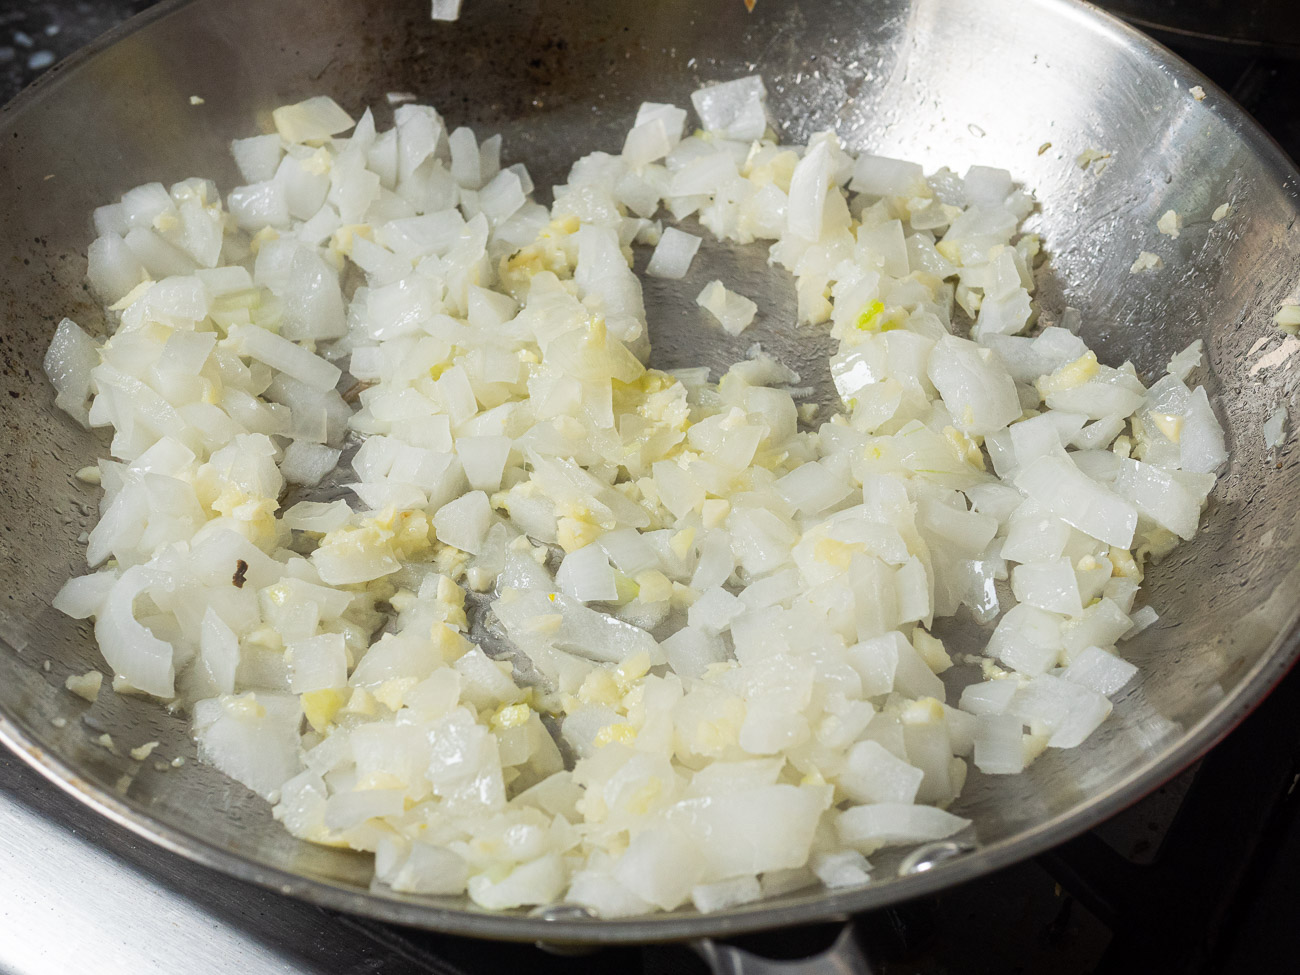 Place a large skillet over medium heat. Add olive oil and saute onion until soft and translucent, 3-4 minutes. Add garlic and cook 1 minute more.